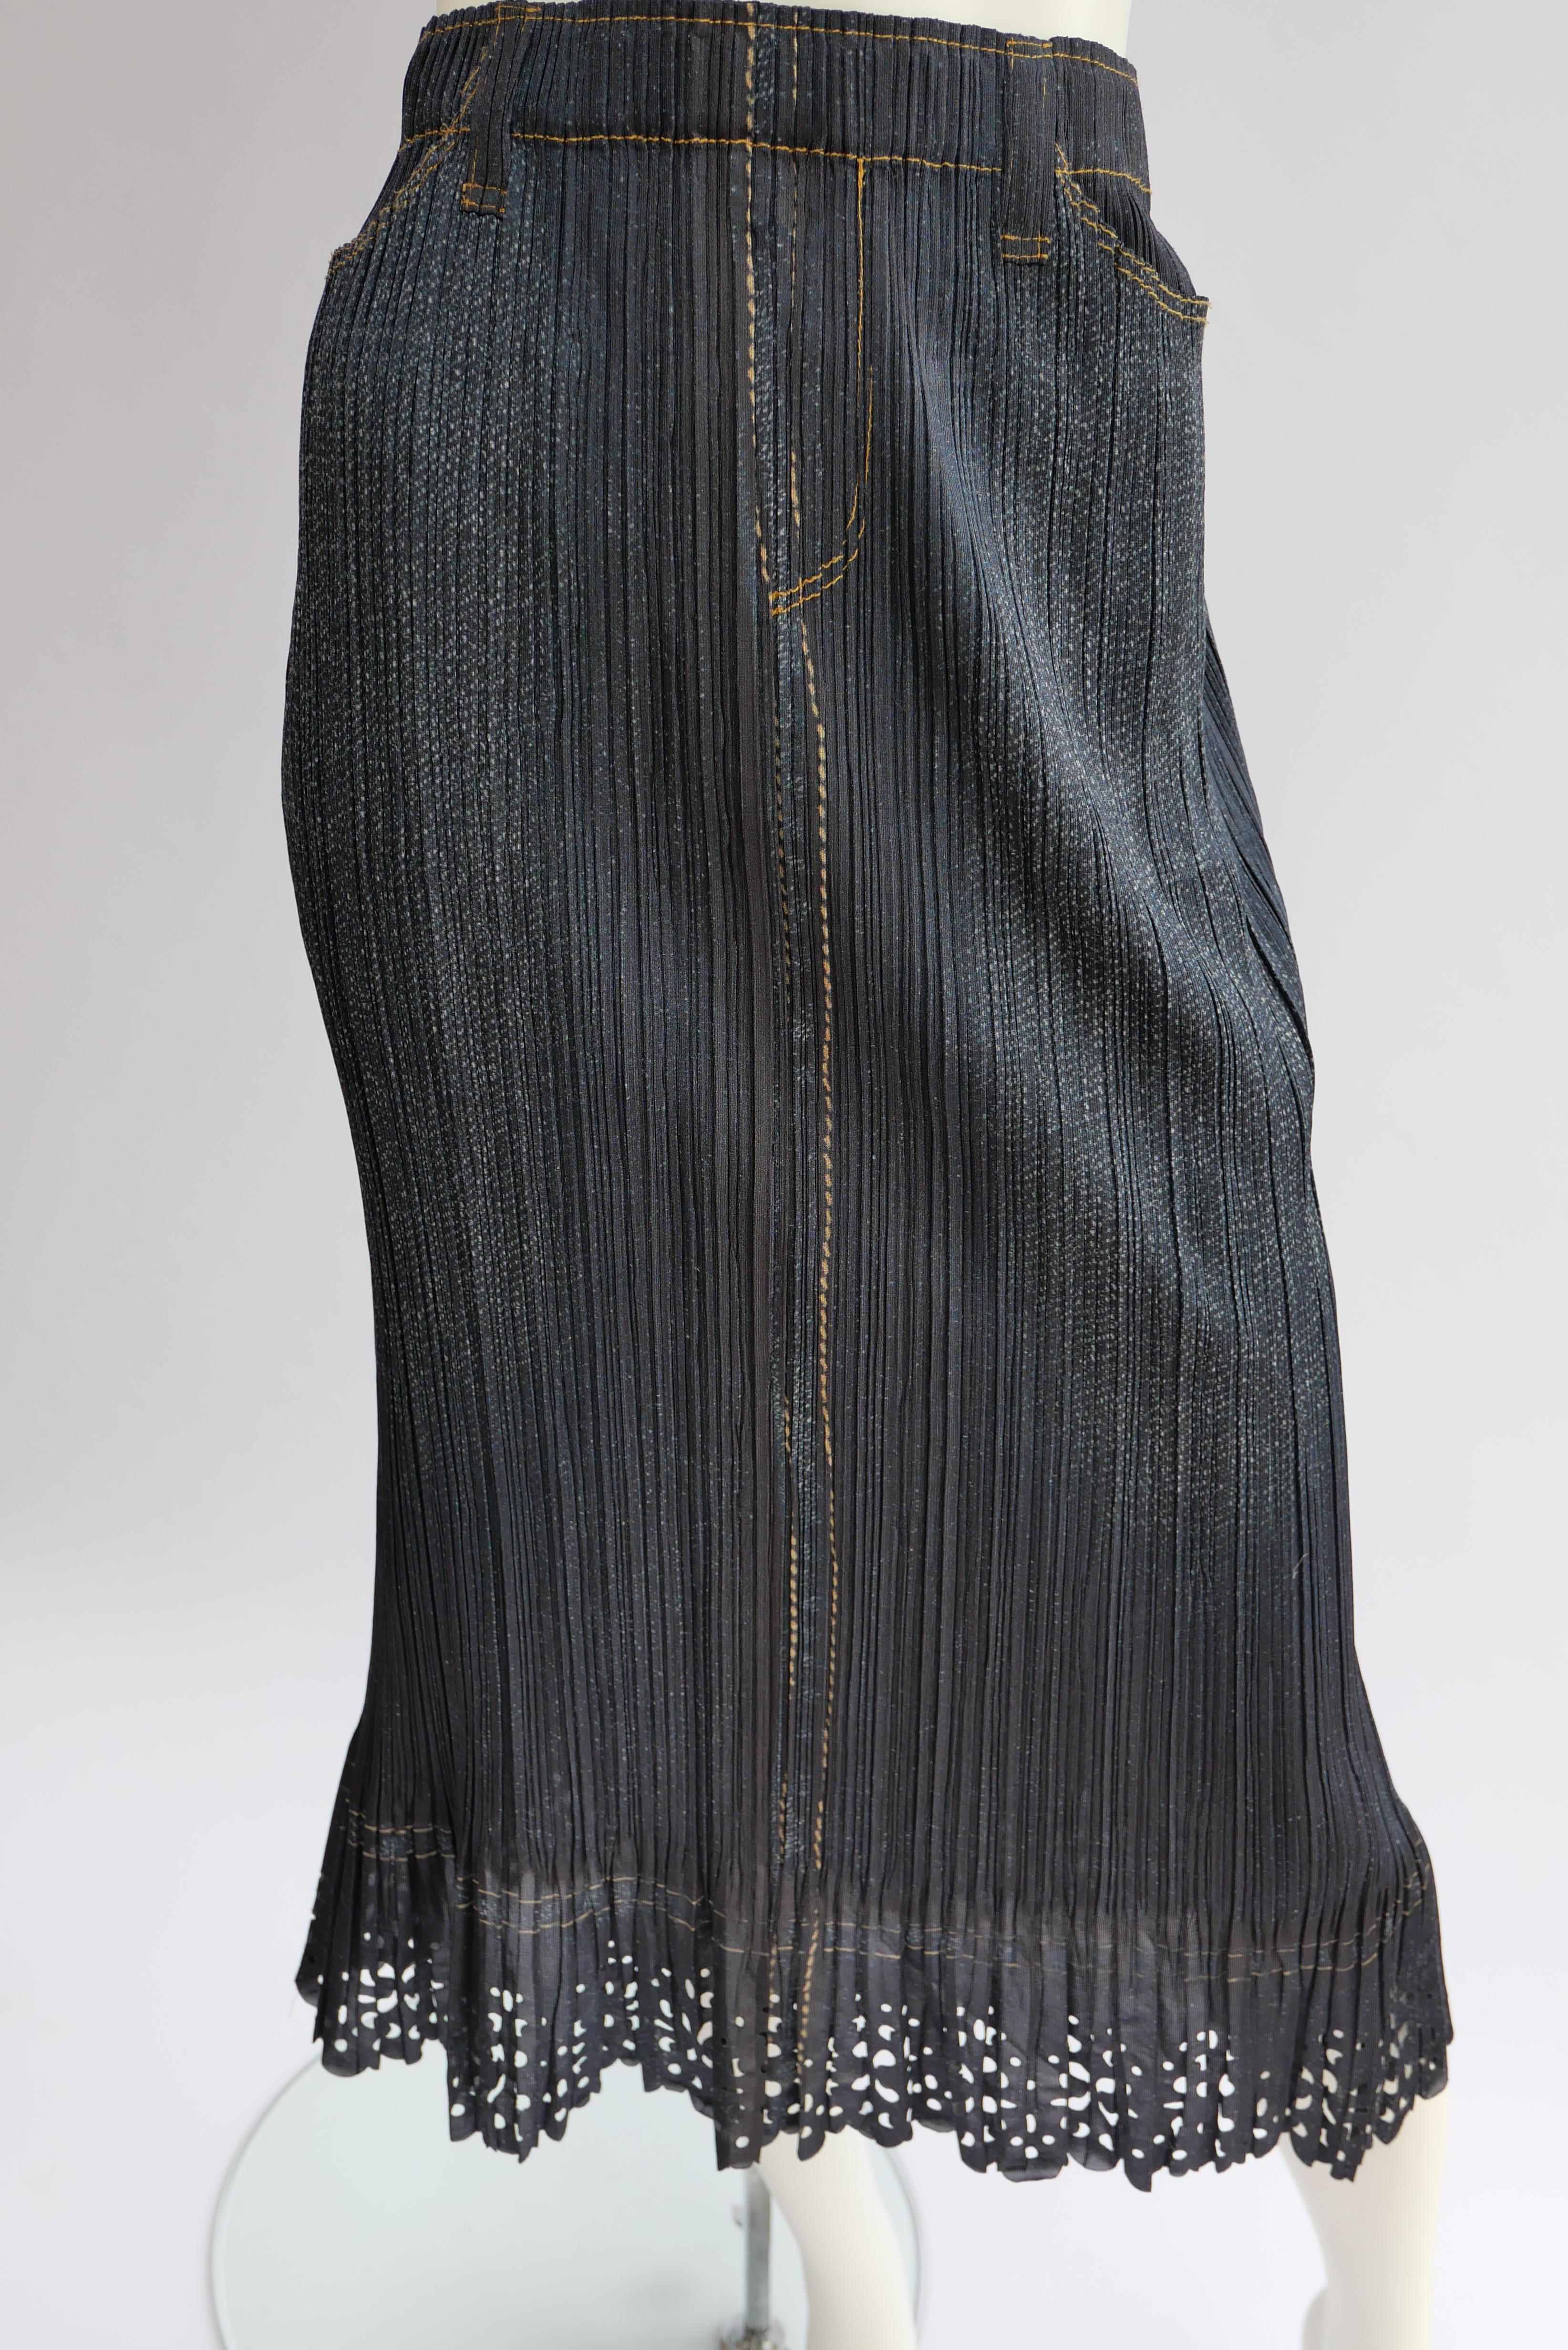 Issey Miyake Pleats Please Denim Printed Skirt 
Issey Miyake pleated skirt with denim print and lace style trim. This skirt is made from the iconic Issey Miyake pleated technology fabric. The material is stretchy so it is versatile in size. 
this